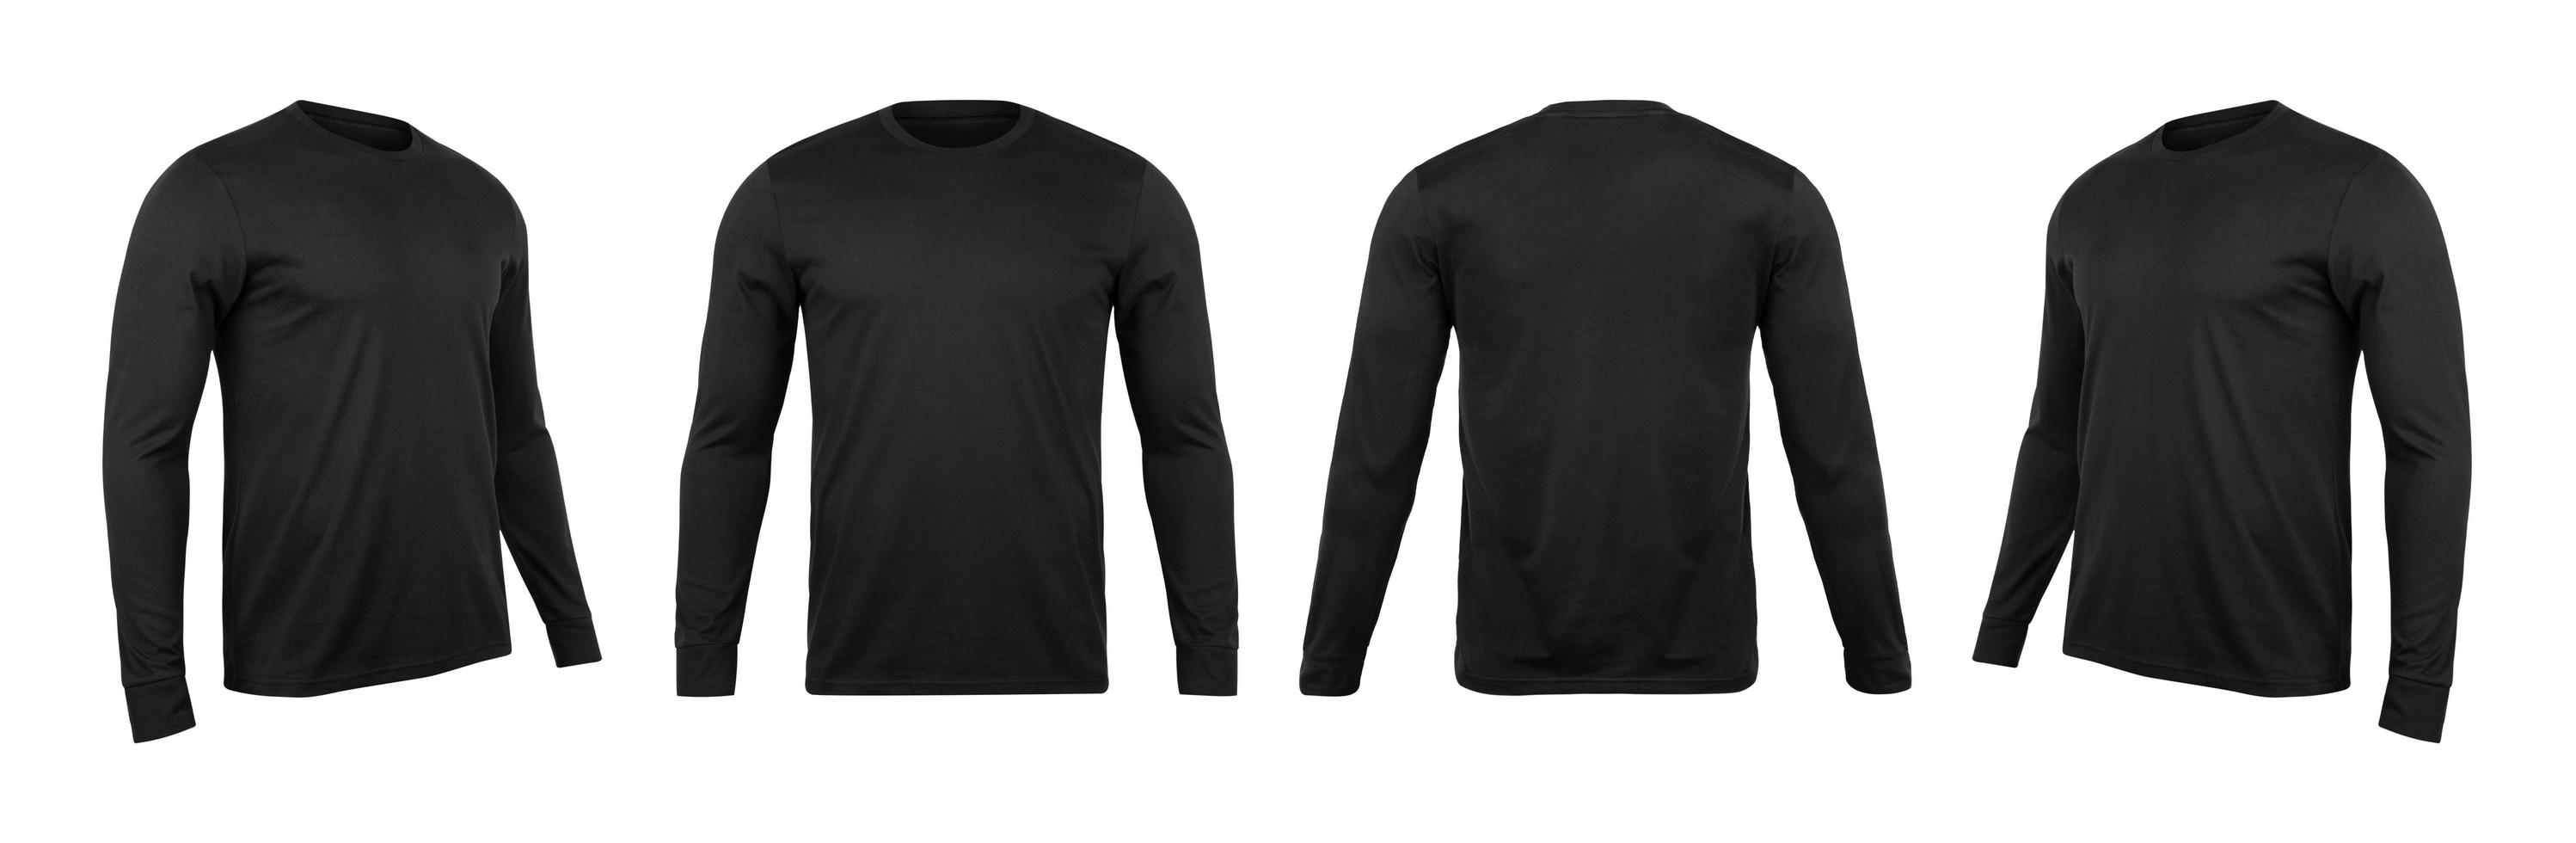 Black long sleeve t shirt isolated on white background with clipping path photo